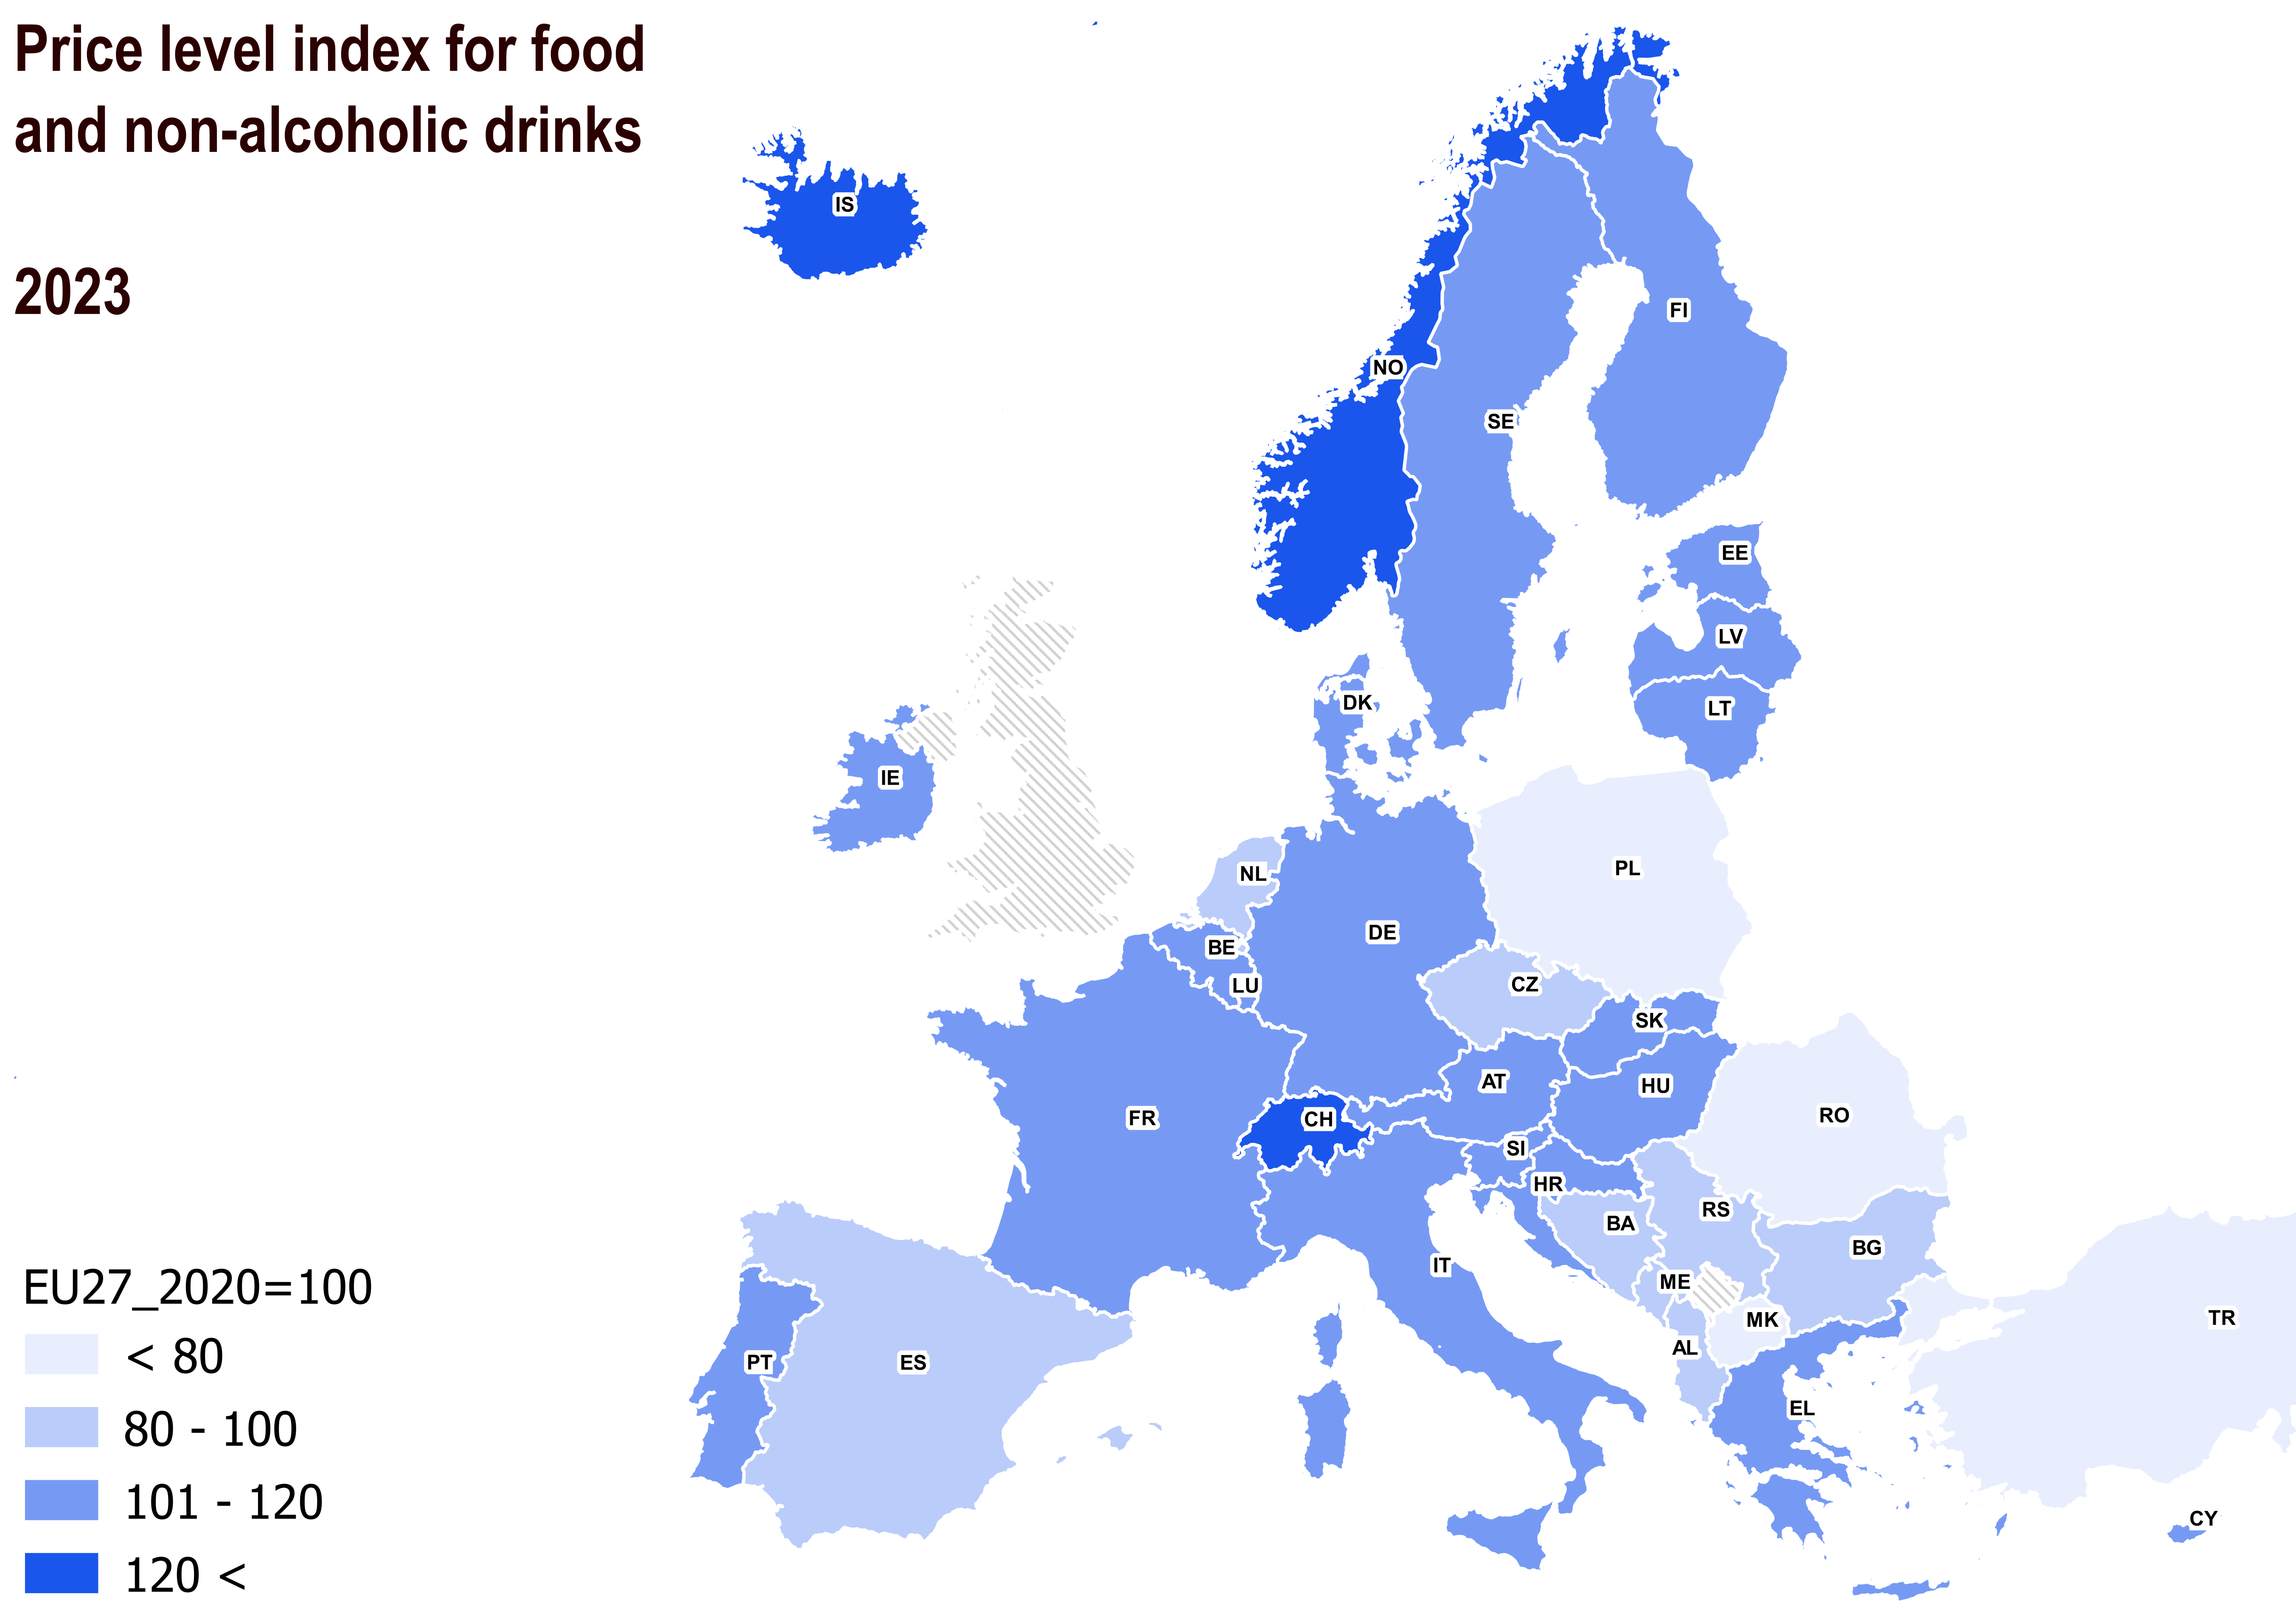 Price level index for food and non-alcoholic drinks illustrated on the map. The EFTA countries Switzerland, Iceland and Norway had the highest price level. The countries with the lowest price level were Türkiye, North Macedonia, Romania and Poland. Finland's price level was 10 % above the EU average.